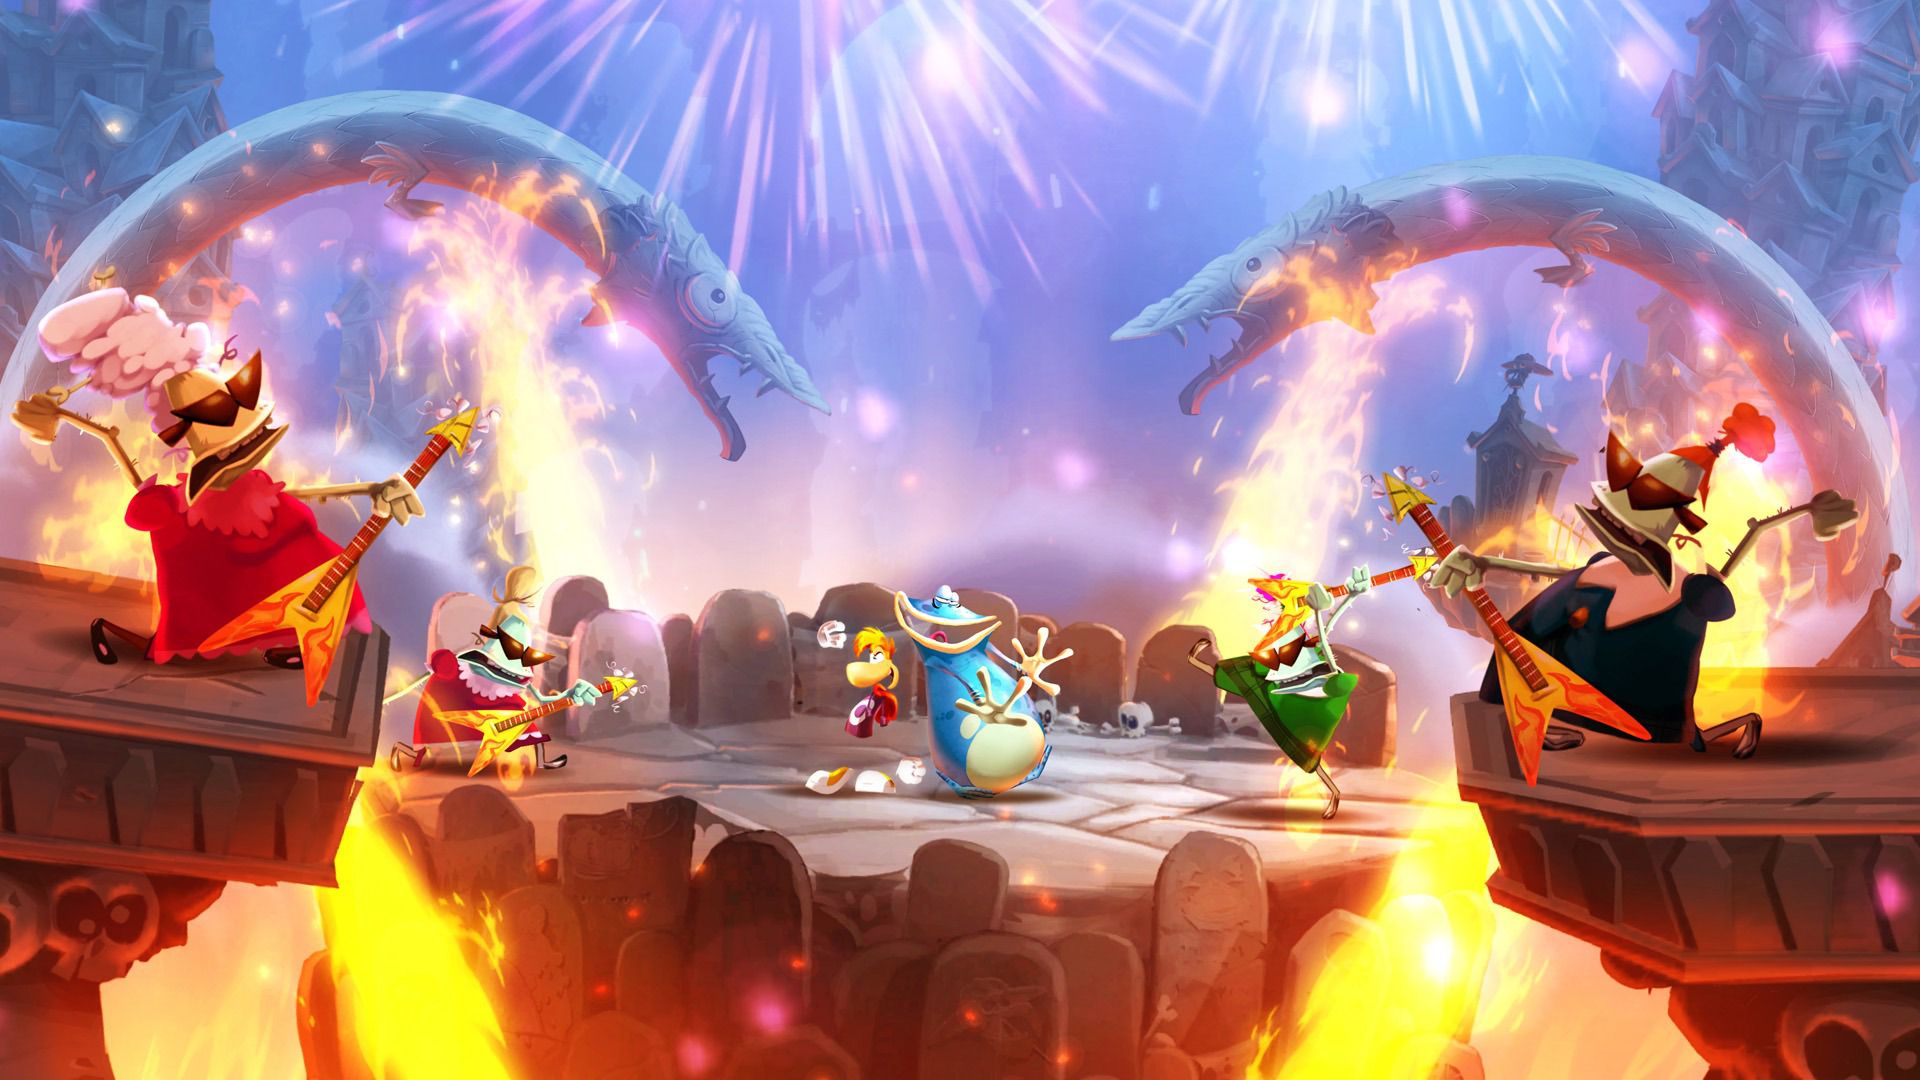 Rayman and Globox pose on a stone platform while a quartet of flying V guitar-playing rock out around them in a screenshot